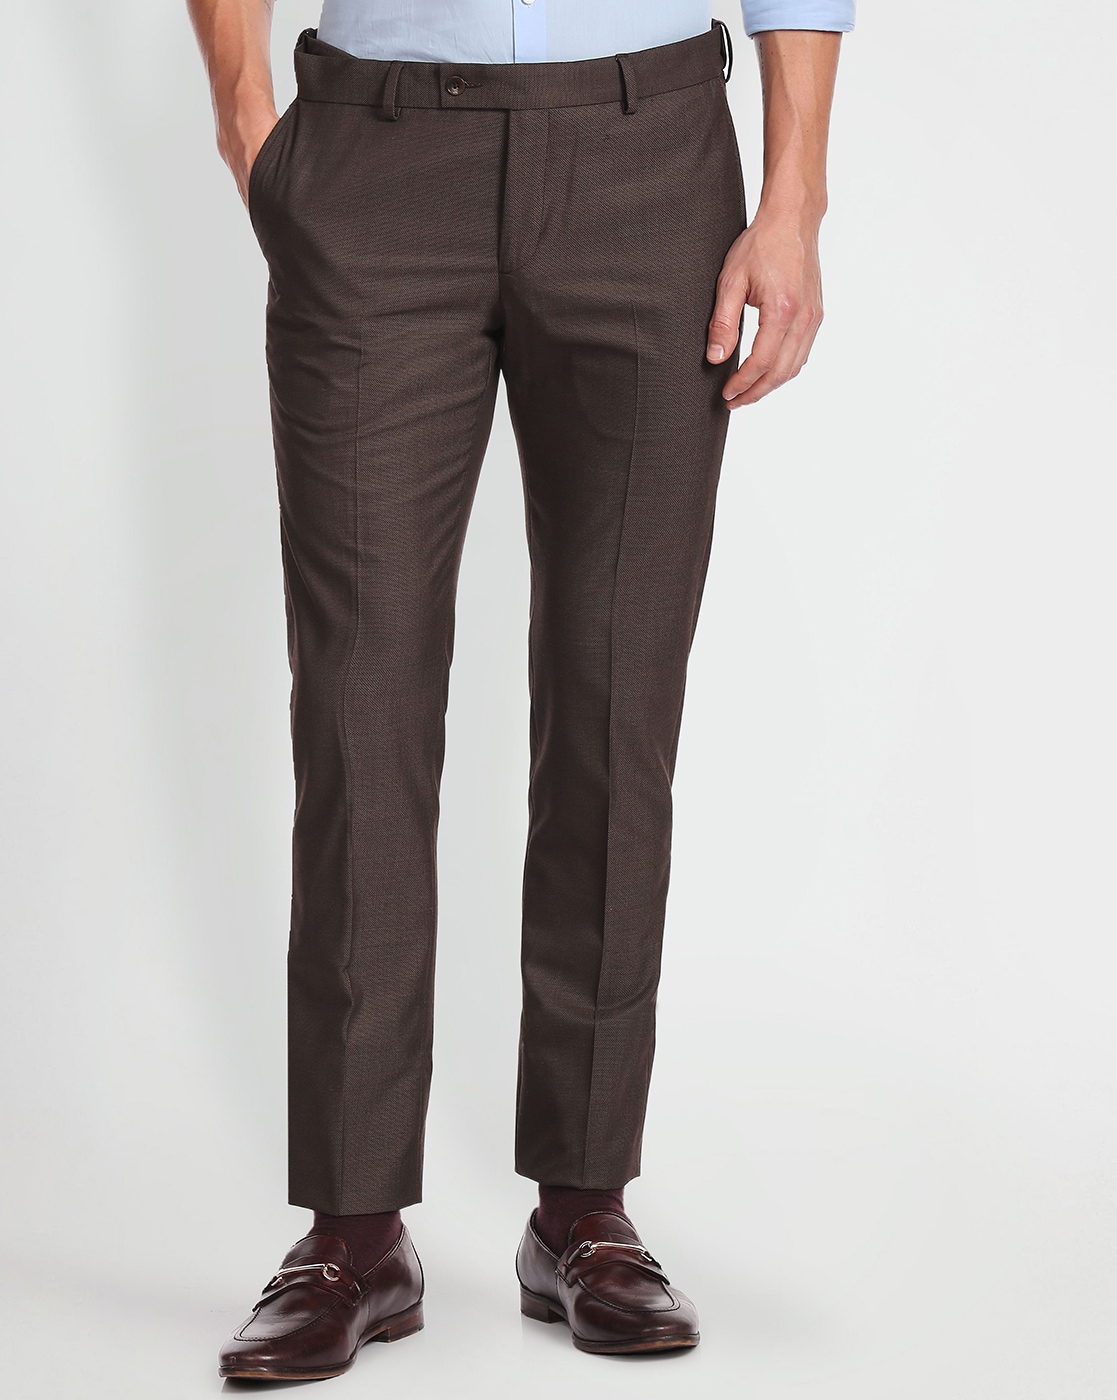 MEN'S DK BROWN SOLID TAPERED FIT TROUSER – JDC Store Online Shopping